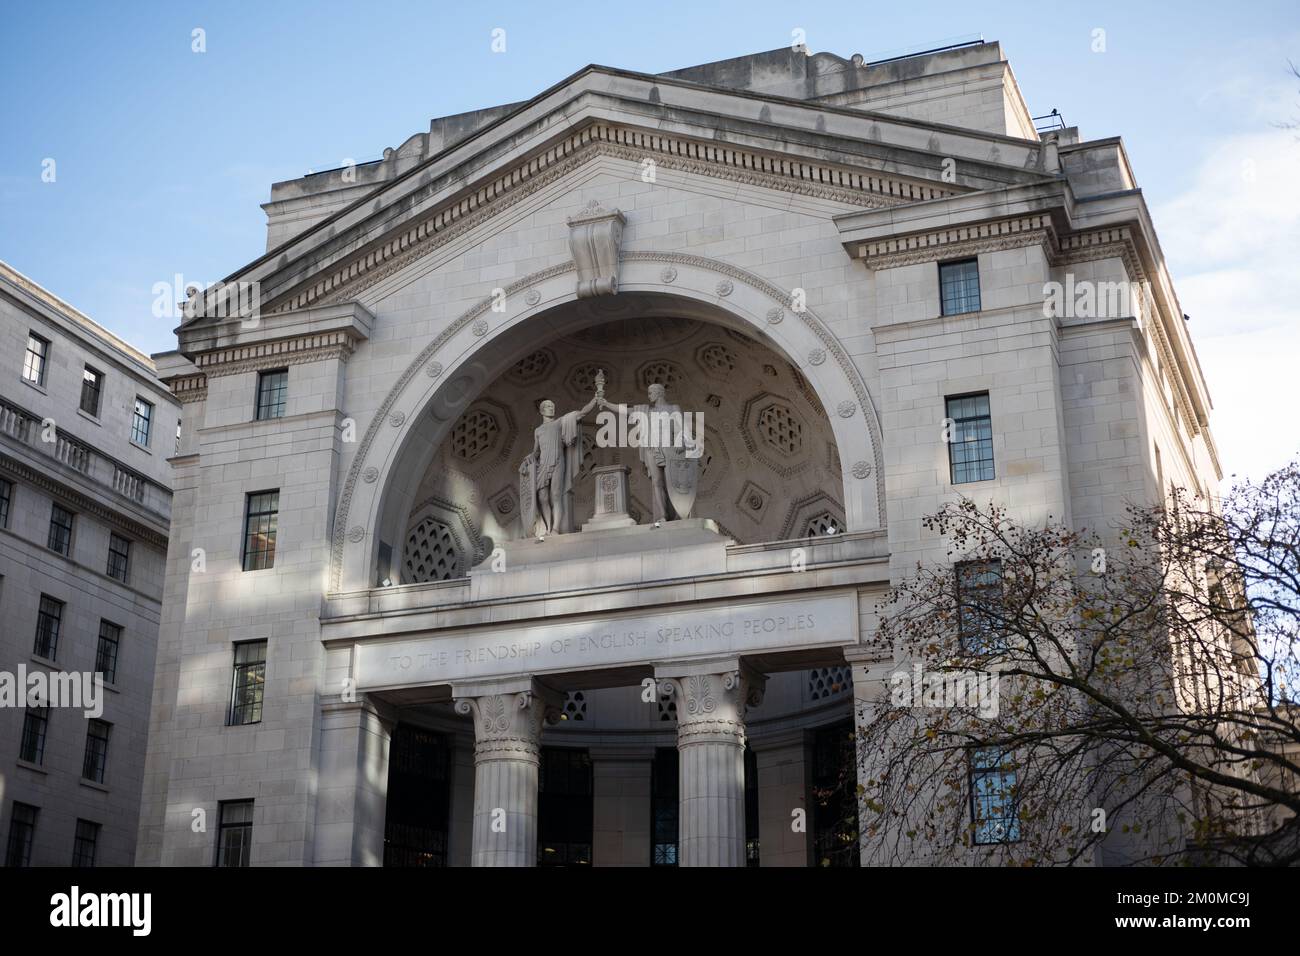 Bush House on the Aldwych in central London. Former home of the BBC World Service. Stock Photo